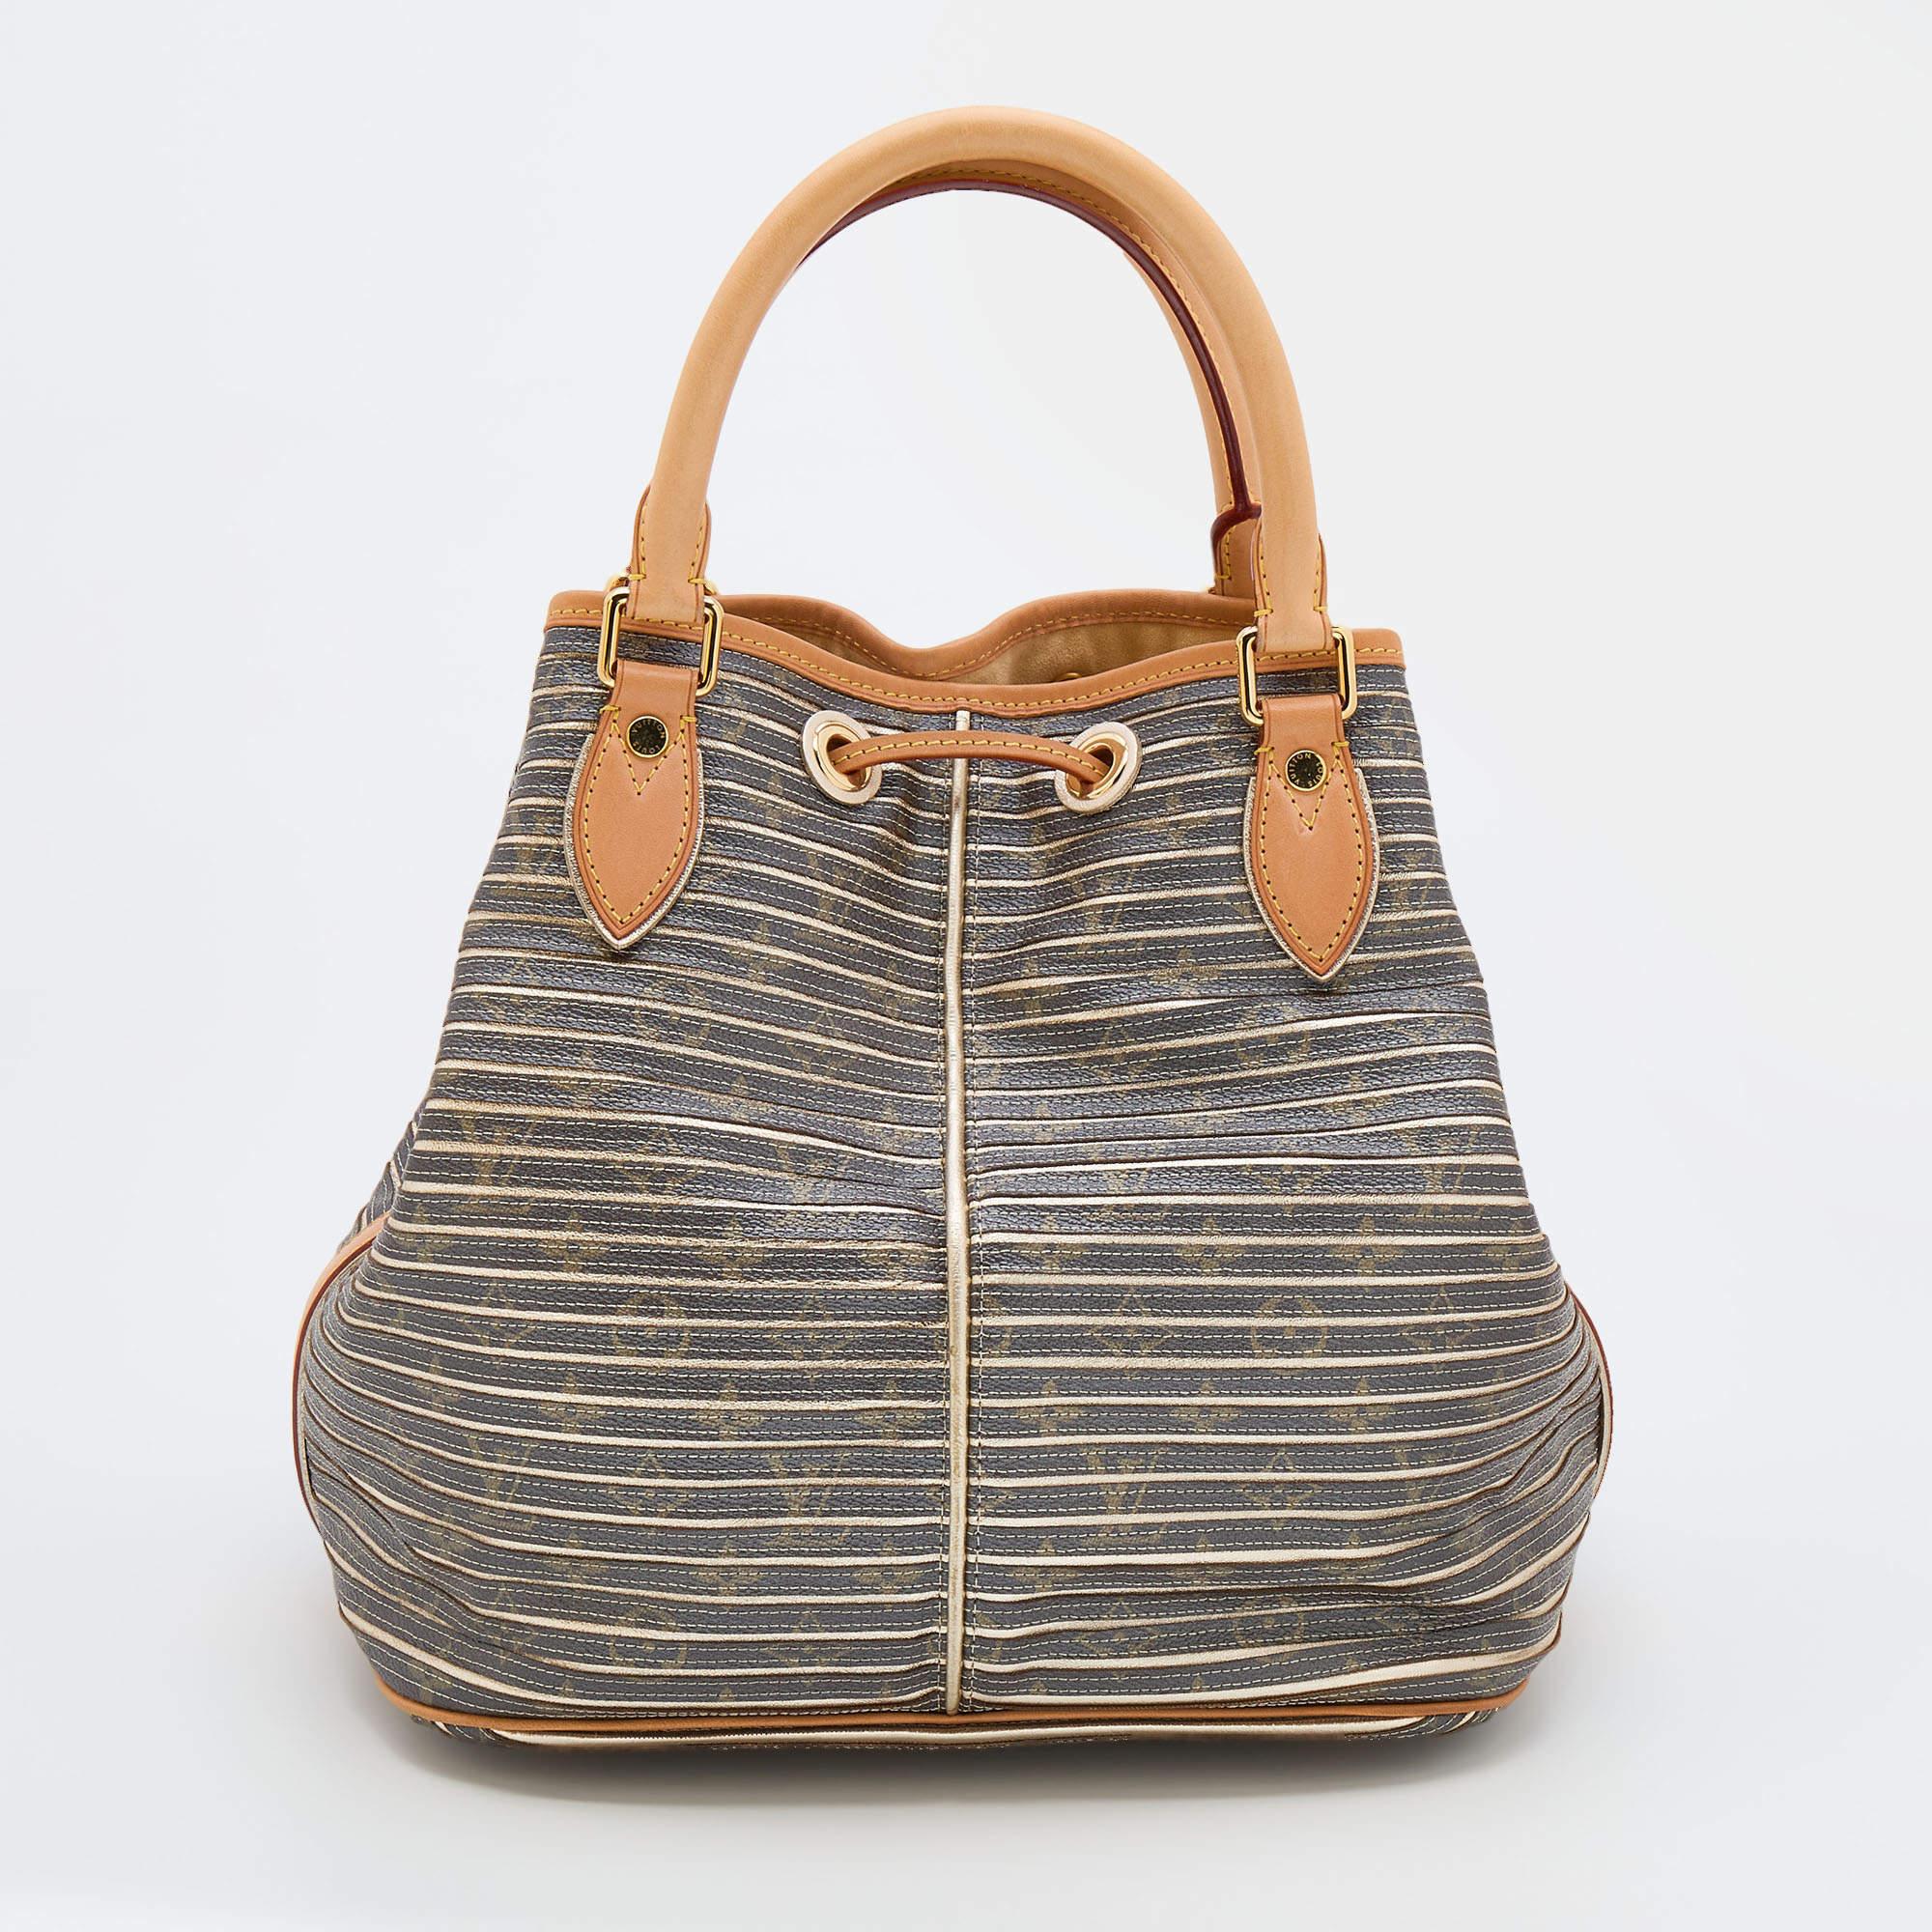 Louis Vuitton's handbags are popular owing to their high style and functionality. This bag, like all their designs, is durable and stylish. Exuding fine finish, the bag is designed to give a luxurious experience. The interior has enough space to